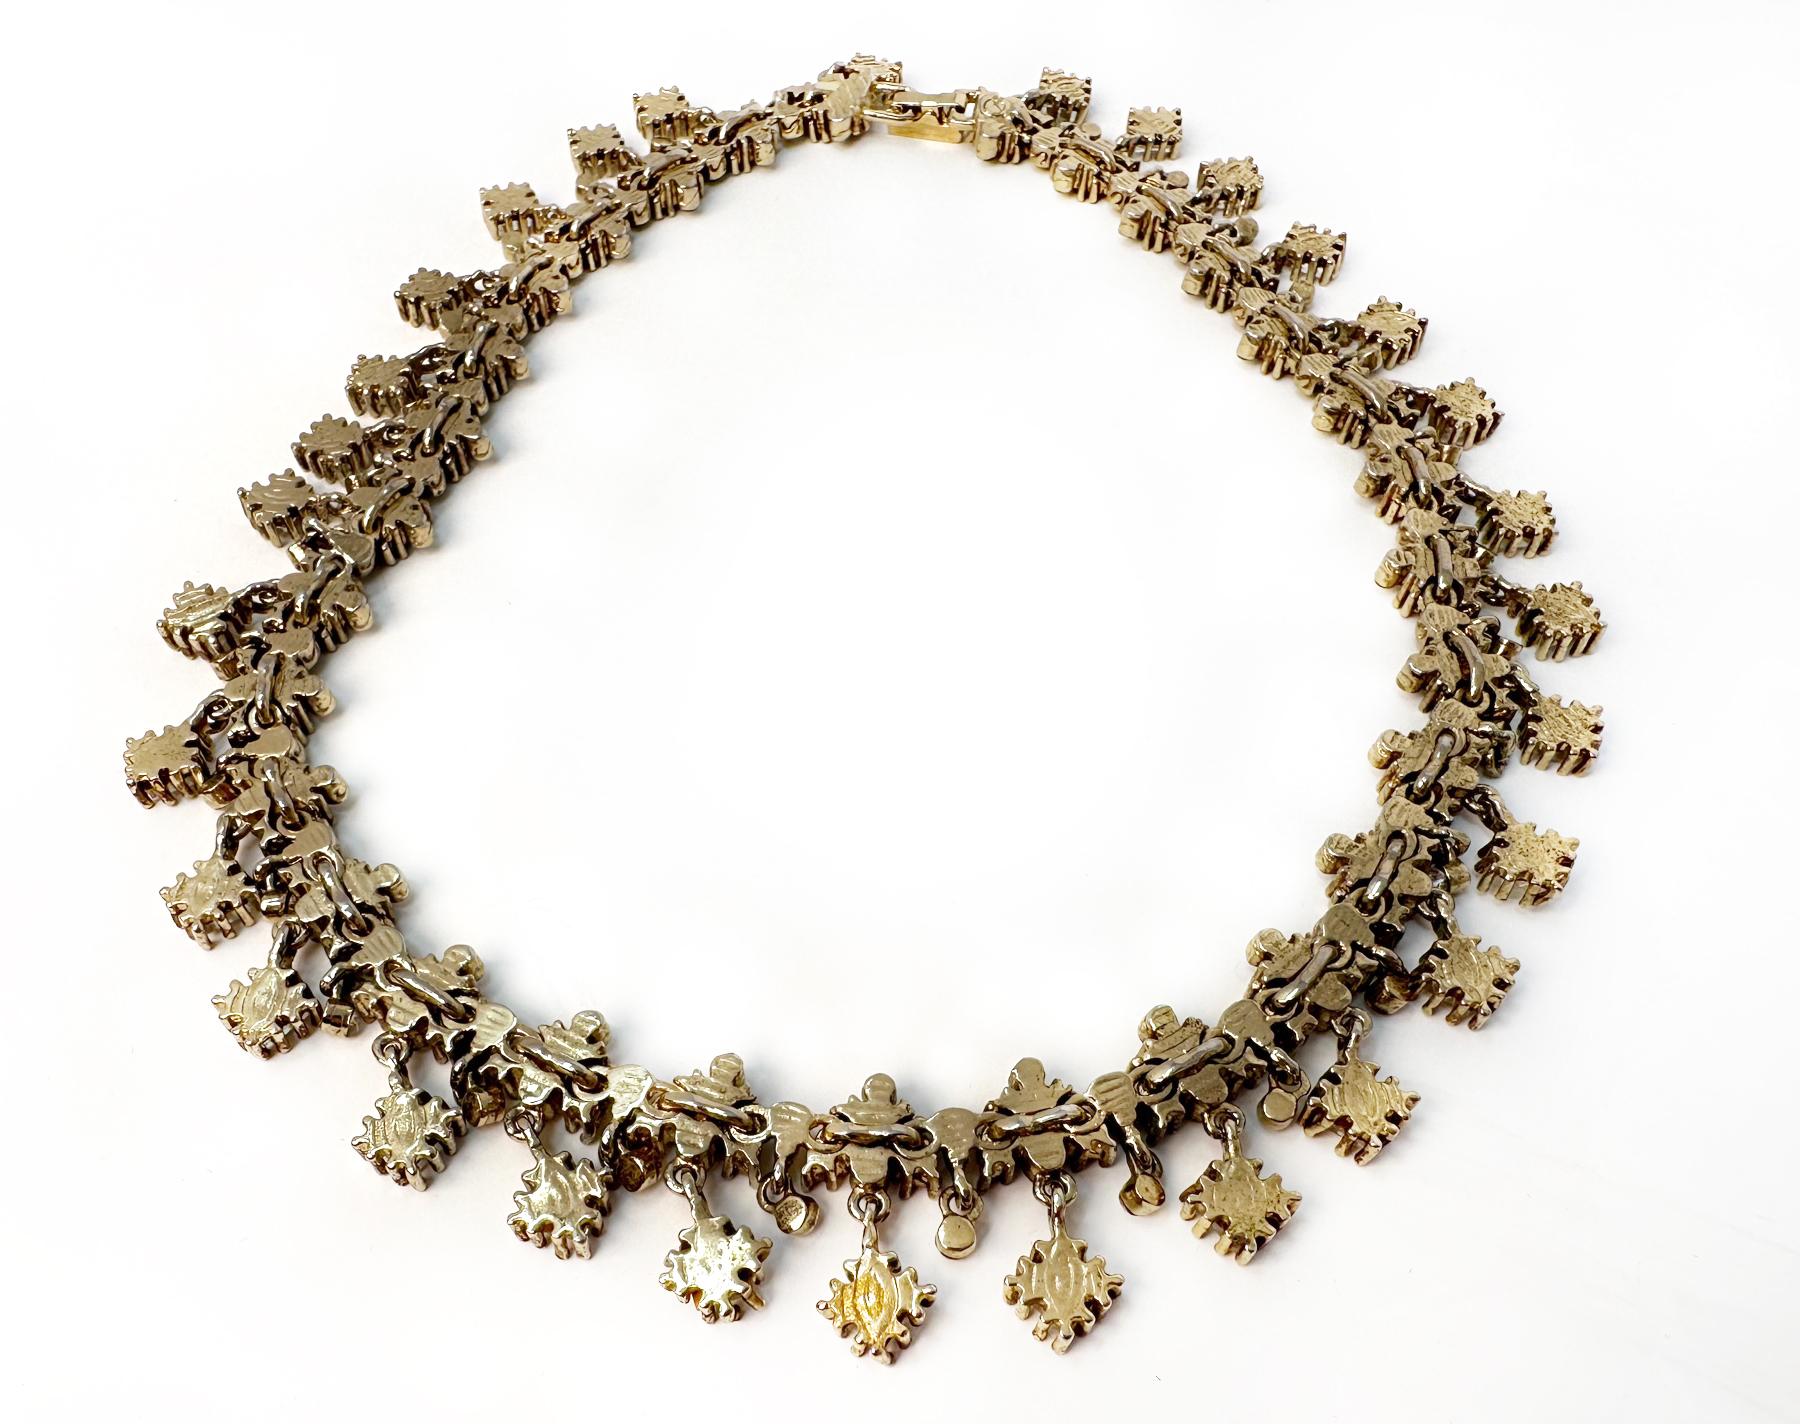 VINTAGE SWAROVSKI REDAND CLEAR  CRYSTAL/MIRROR CHOKER NECKLACE 

About the Item
This stunning Daniel Swarovski Paris couture jeweled choker necklace features an around-the-neck shape with Victorian-Mughal inspired flair. The choker is built with